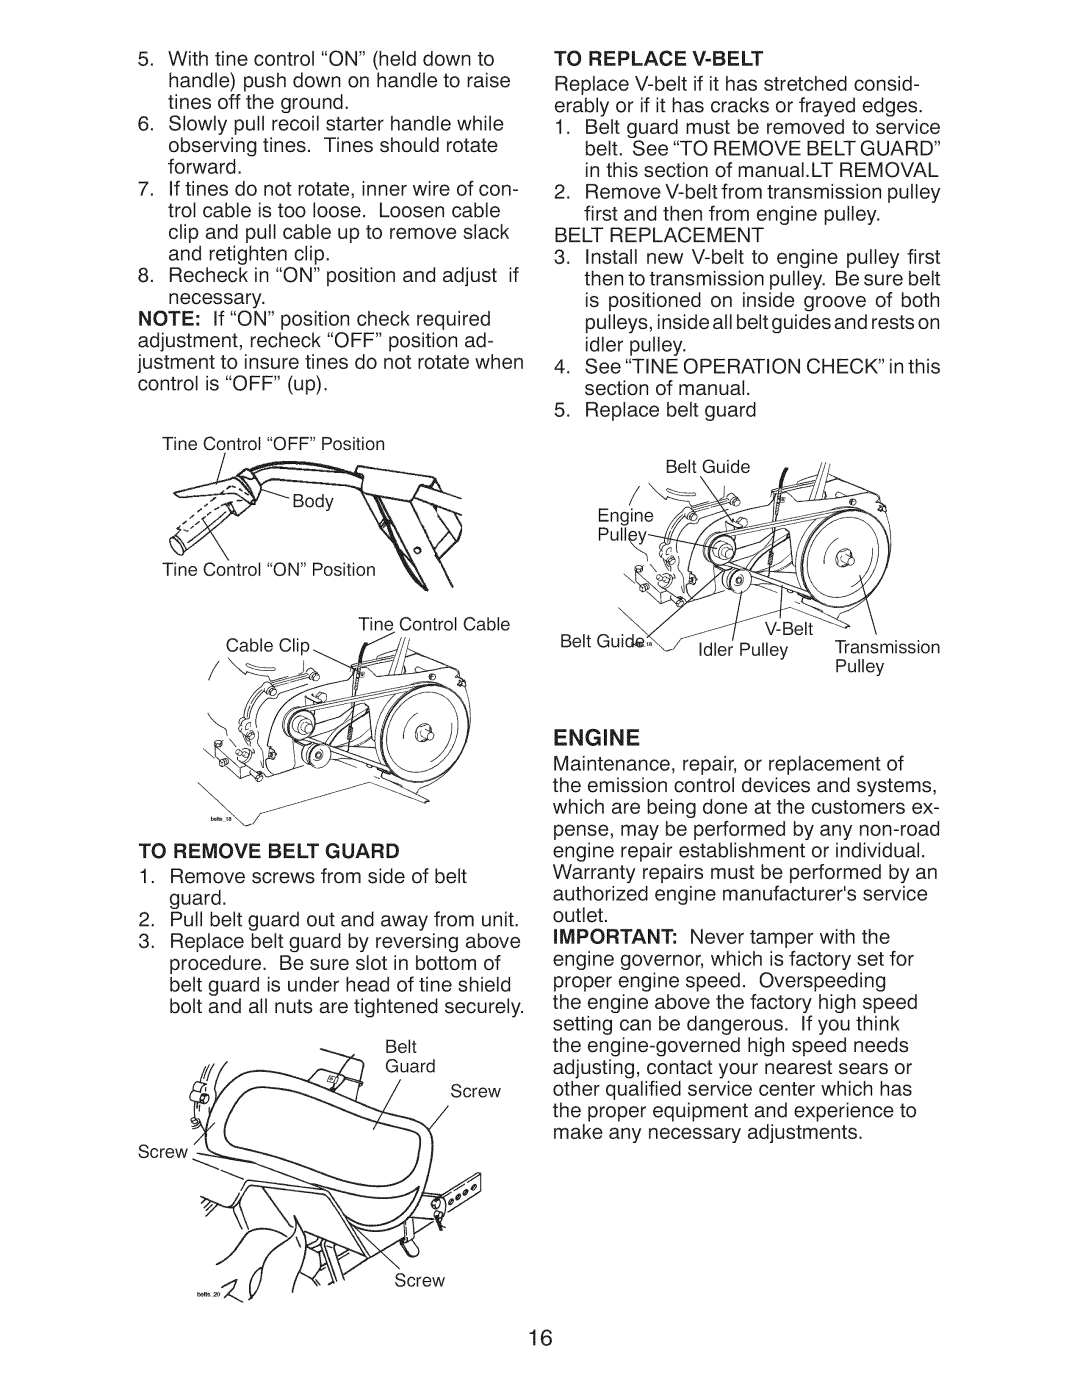 Craftsman 917.29921 owner manual Engine, Recheck in ON position and adjust if necessary 